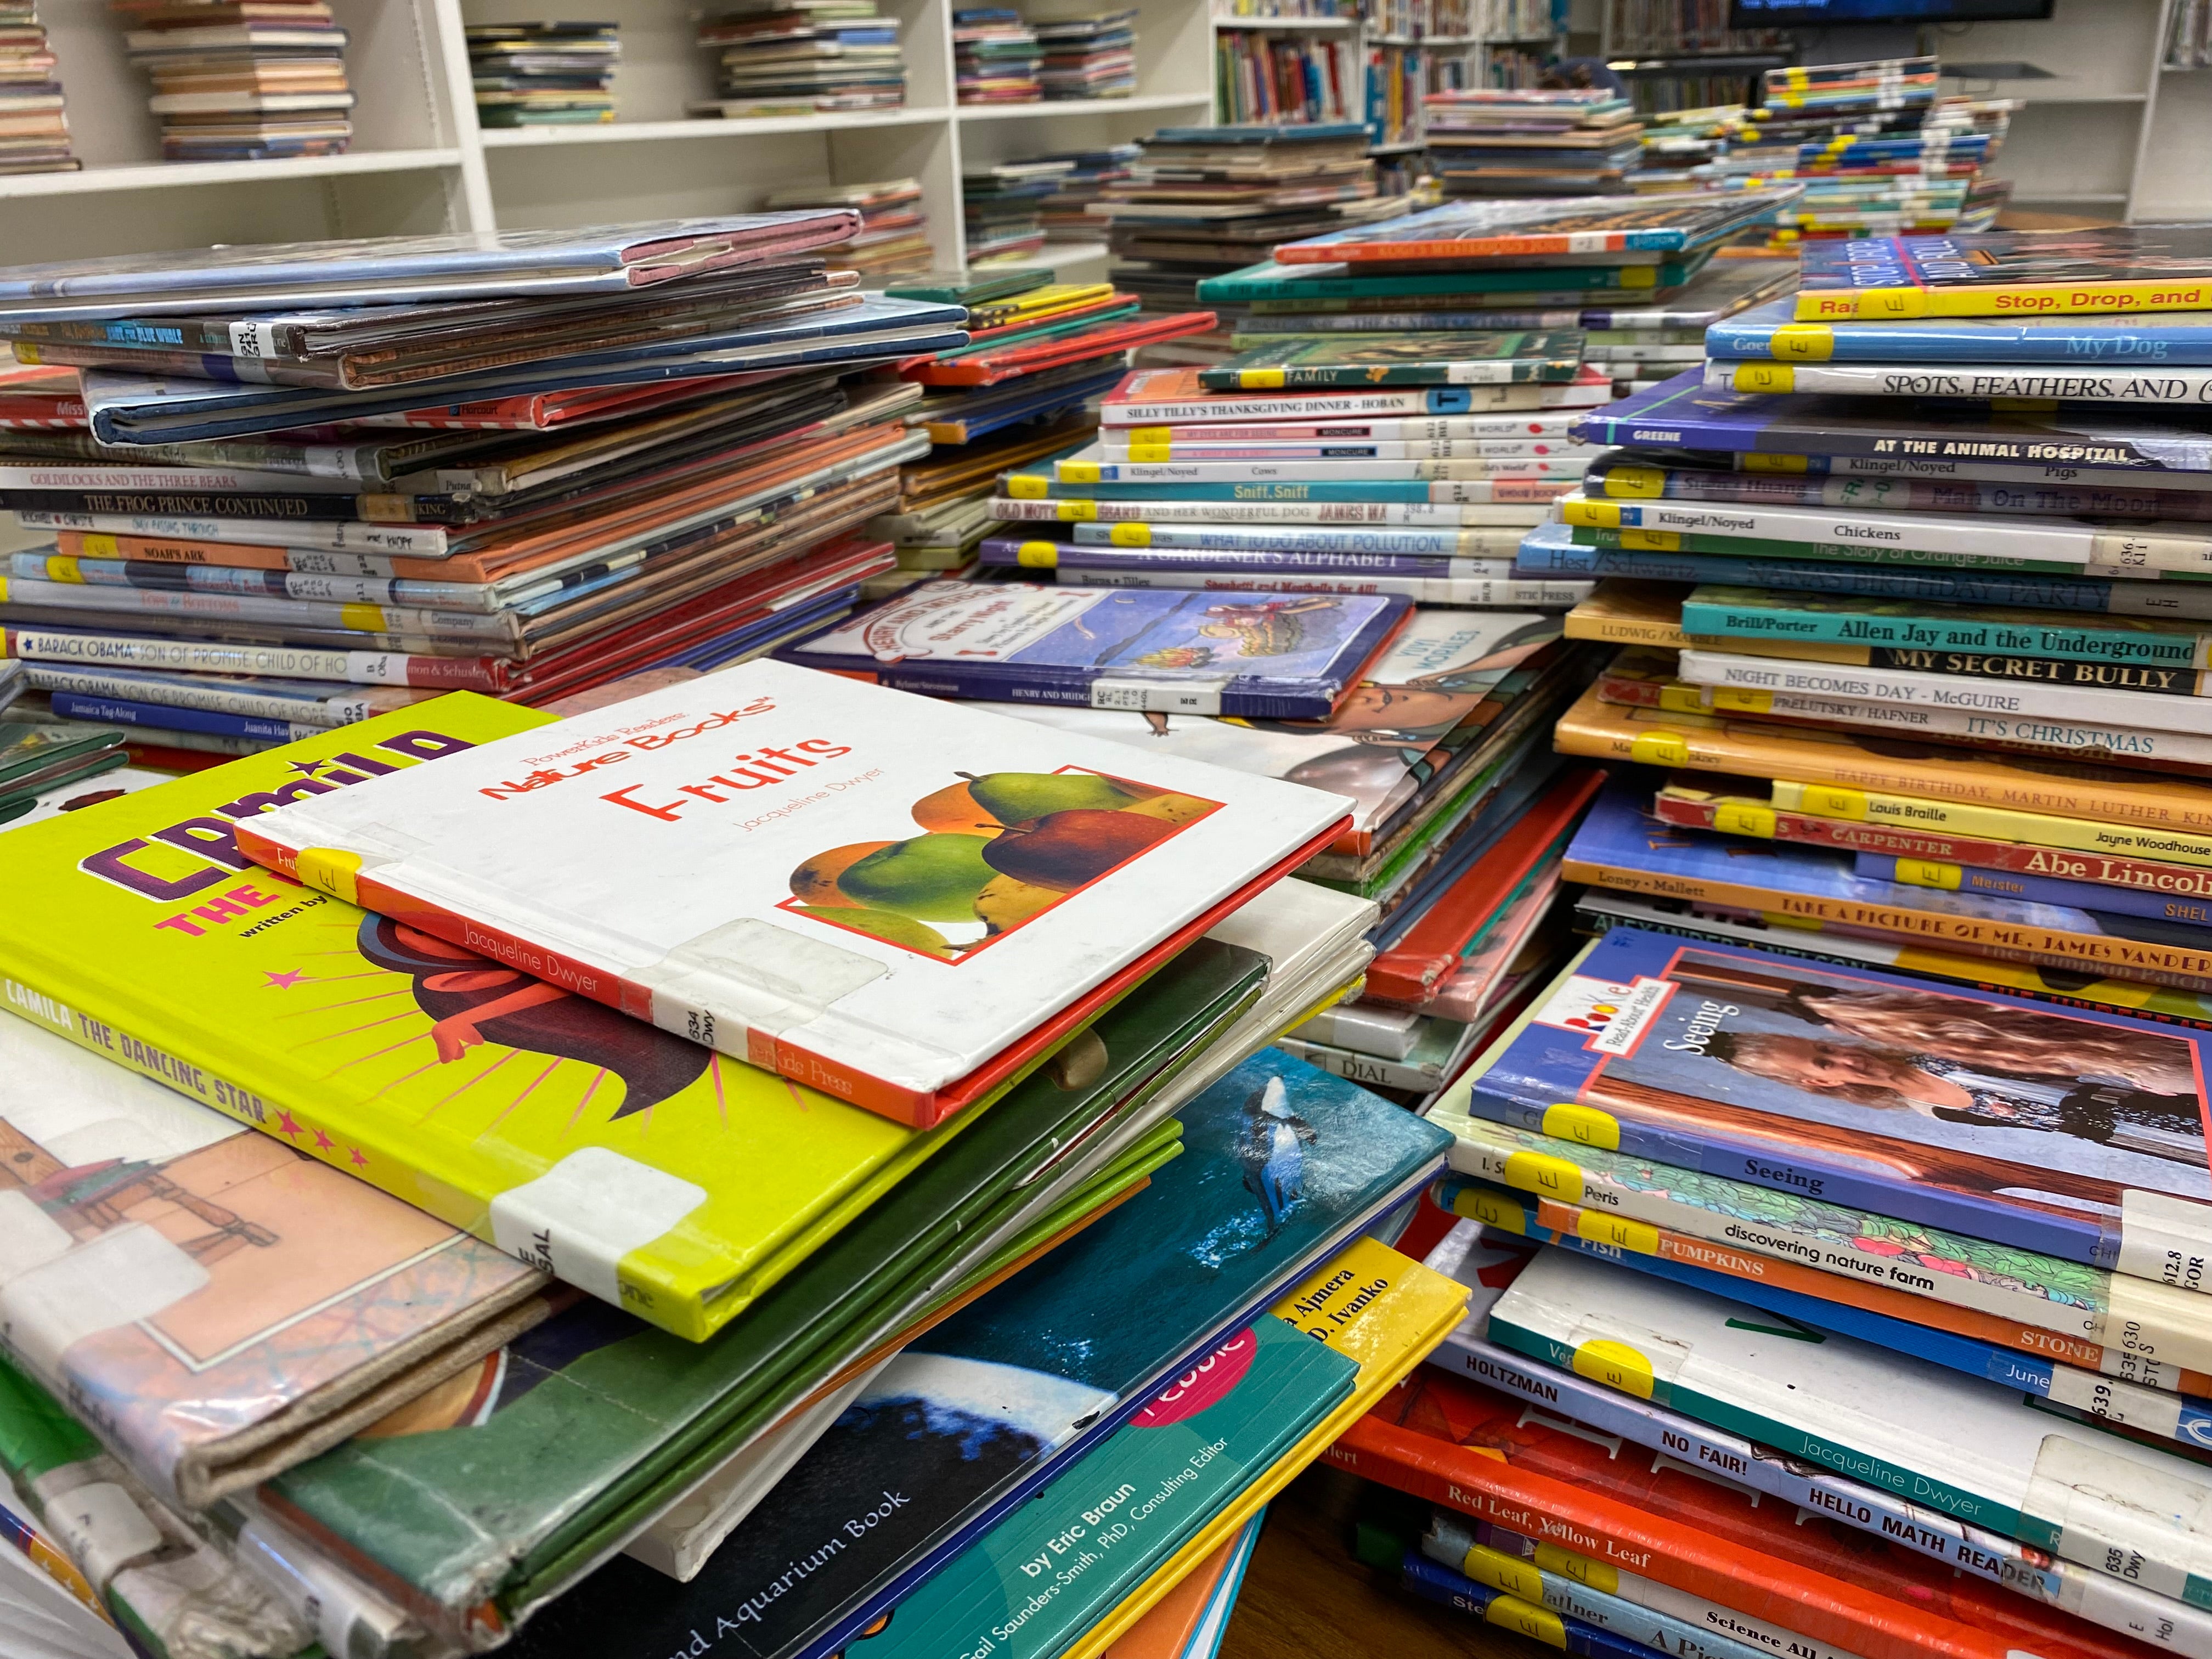 Books that were removed from school libraries to be vetted by librarians in order to comply with Florida censorship laws.